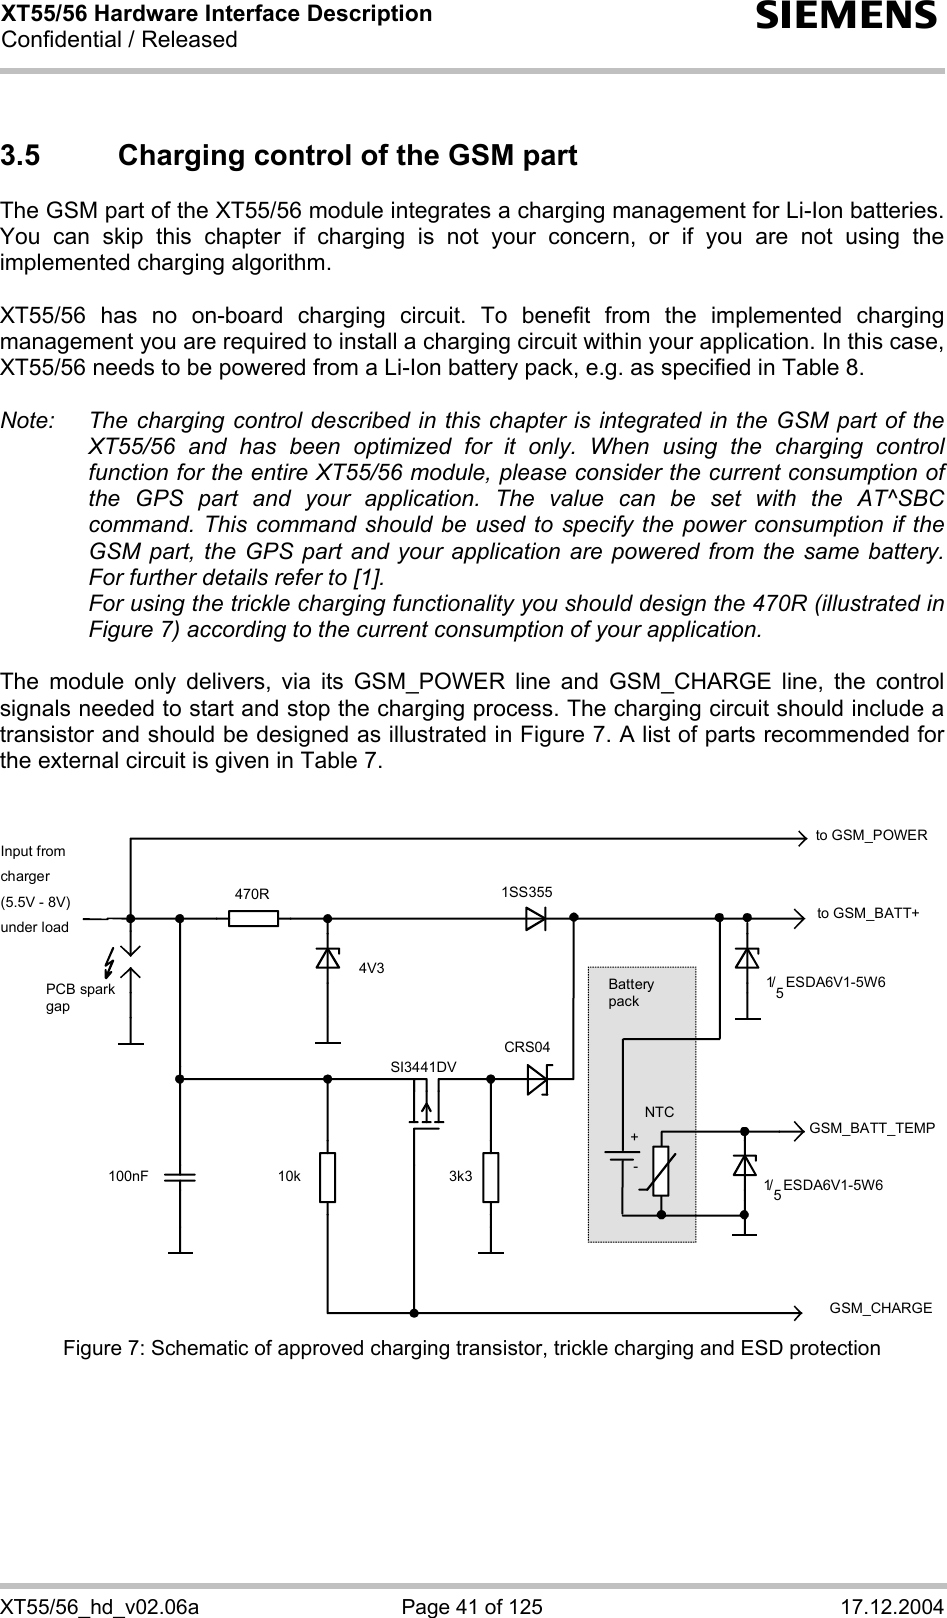 XT55/56 Hardware Interface Description Confidential / Released s XT55/56_hd_v02.06a  Page 41 of 125  17.12.2004 3.5  Charging control of the GSM part The GSM part of the XT55/56 module integrates a charging management for Li-Ion batteries. You can skip this chapter if charging is not your concern, or if you are not using the implemented charging algorithm.  XT55/56 has no on-board charging circuit. To benefit from the implemented charging management you are required to install a charging circuit within your application. In this case, XT55/56 needs to be powered from a Li-Ion battery pack, e.g. as specified in Table 8.  Note:  The charging control described in this chapter is integrated in the GSM part of the XT55/56 and has been optimized for it only. When using the charging control function for the entire XT55/56 module, please consider the current consumption of the GPS part and your application. The value can be set with the AT^SBC command. This command should be used to specify the power consumption if the GSM part, the GPS part and your application are powered from the same battery. For further details refer to [1].   For using the trickle charging functionality you should design the 470R (illustrated in Figure 7) according to the current consumption of your application.  The module only delivers, via its GSM_POWER line and GSM_CHARGE line, the control signals needed to start and stop the charging process. The charging circuit should include a transistor and should be designed as illustrated in Figure 7. A list of parts recommended for the external circuit is given in Table 7.   to GSM_BATT+Input fromcharger(5.5V - 8V)under loadGSM_CHARGE470R 1SS3553k3100nF 10kSI3441DV4V31/ 5 ESDA6V1-5W6to GSM_POWERGSM_BATT_TEMP1/ 5 ESDA6V1-5W6NTC+Battery packPCB spark gapCRS04- Figure 7: Schematic of approved charging transistor, trickle charging and ESD protection  